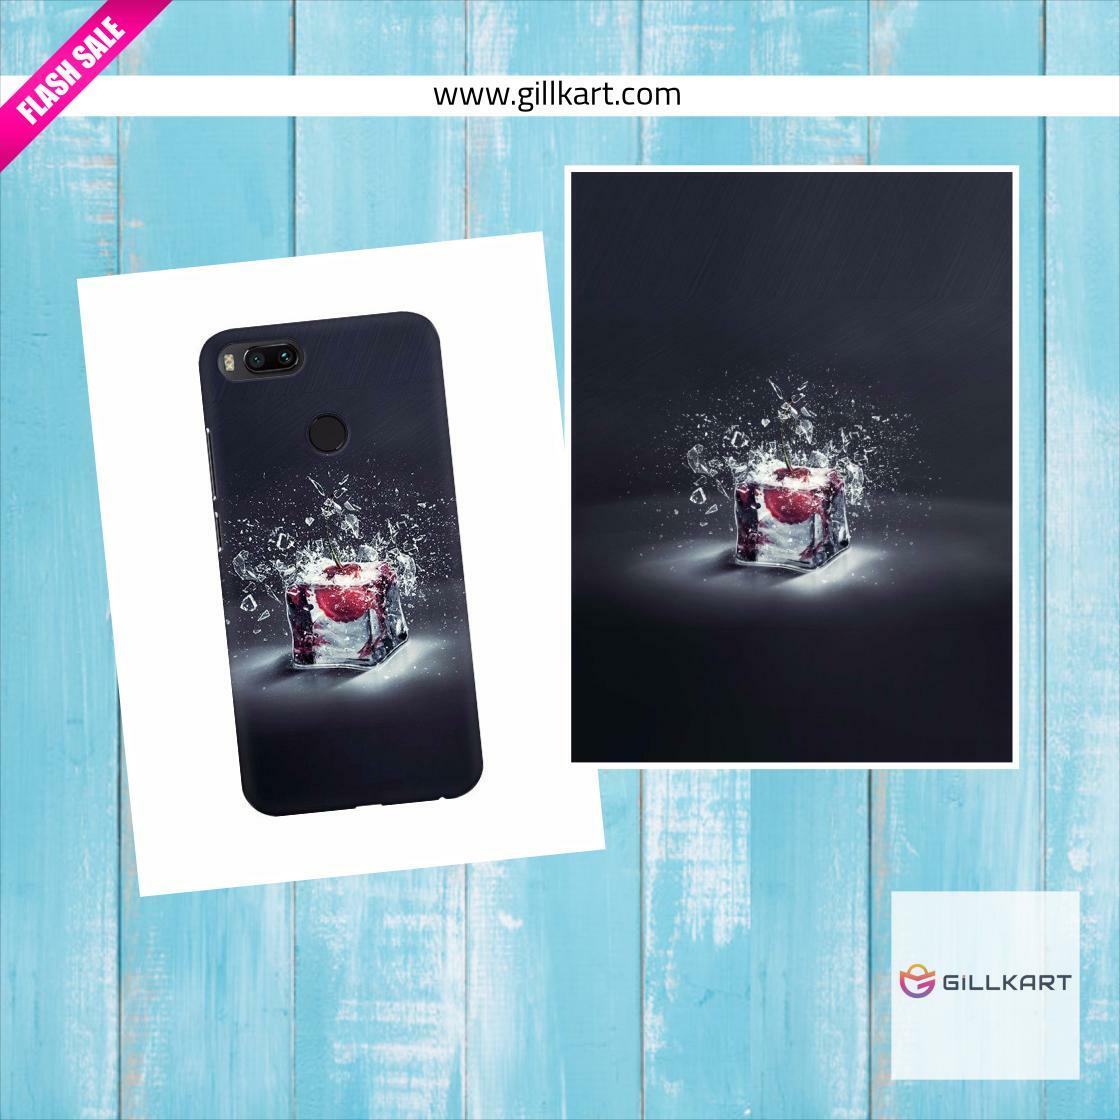 Top offer of the season! Spark Ice Apple Effect Mobile Case Cover, now at an exclusive price of ₹195
gillkart.com/products/spark…
#IndianOutfit #TraditionalSaree